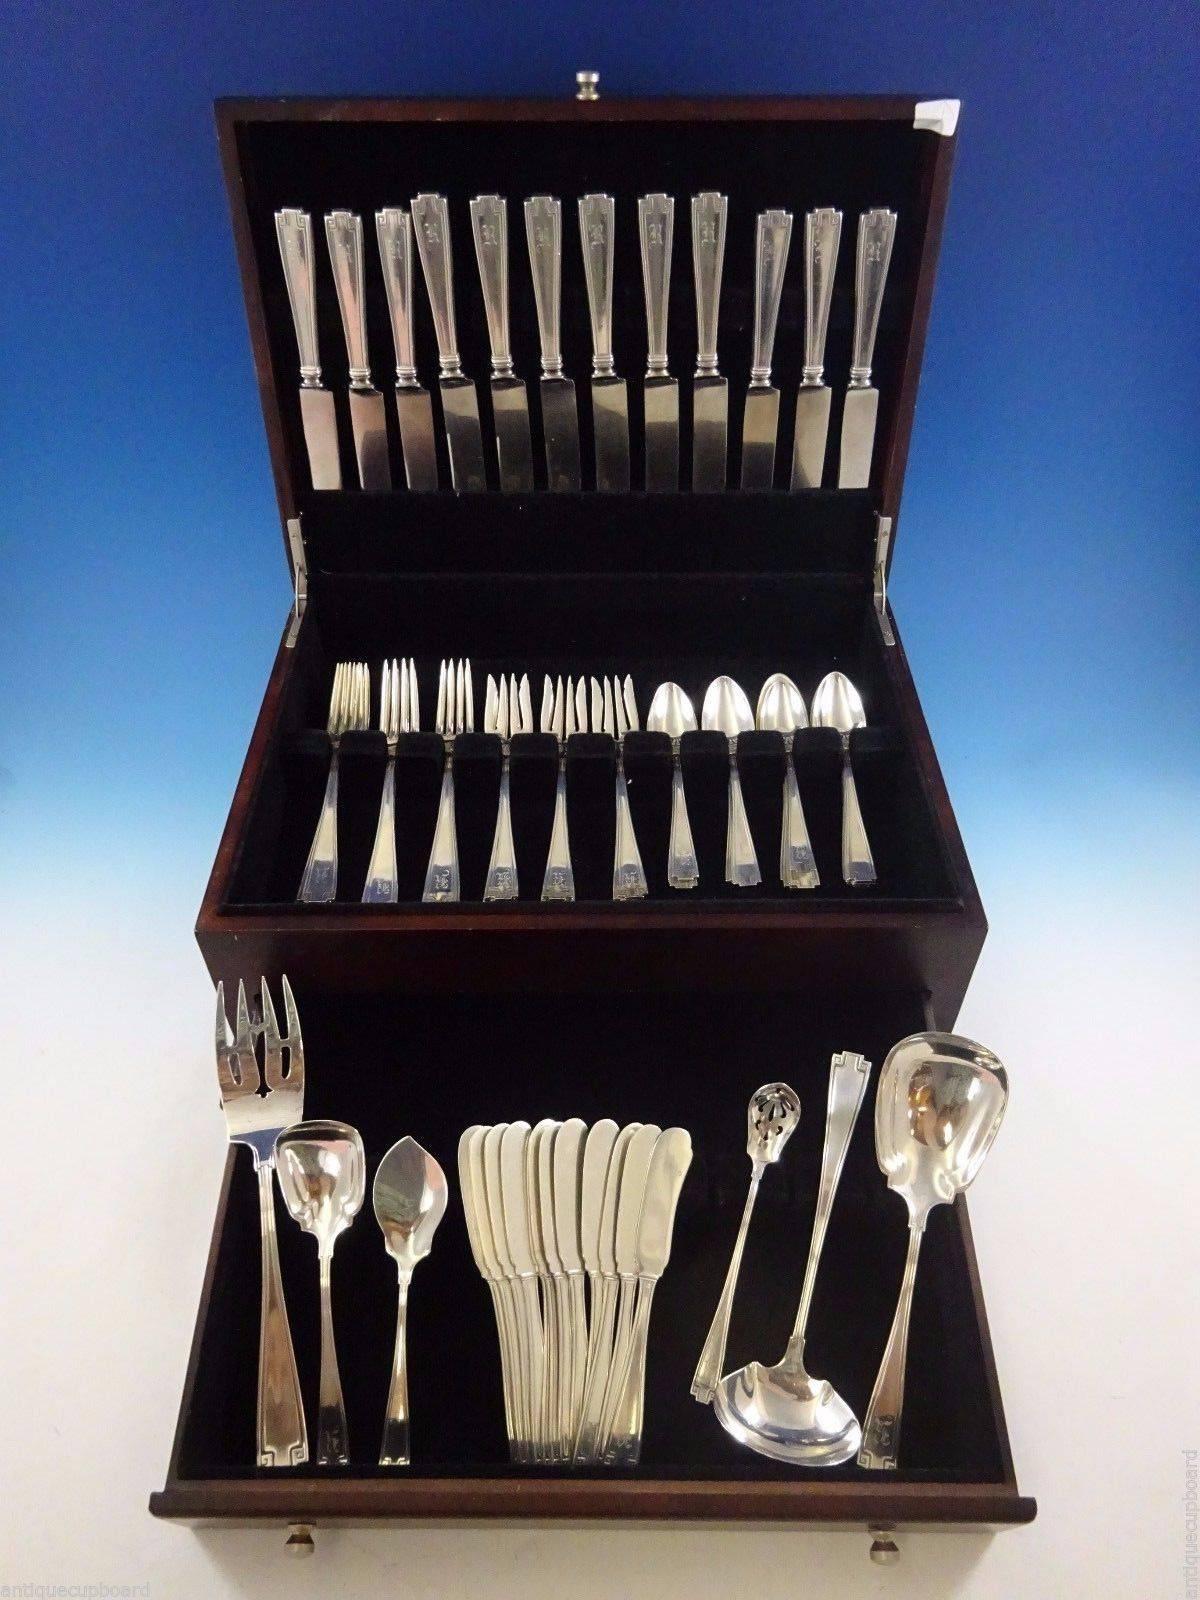 Etruscan by Gorham sterling silver flatware set - 79 pieces. This set includes: 

Six knives, new French blade, 8 1/2